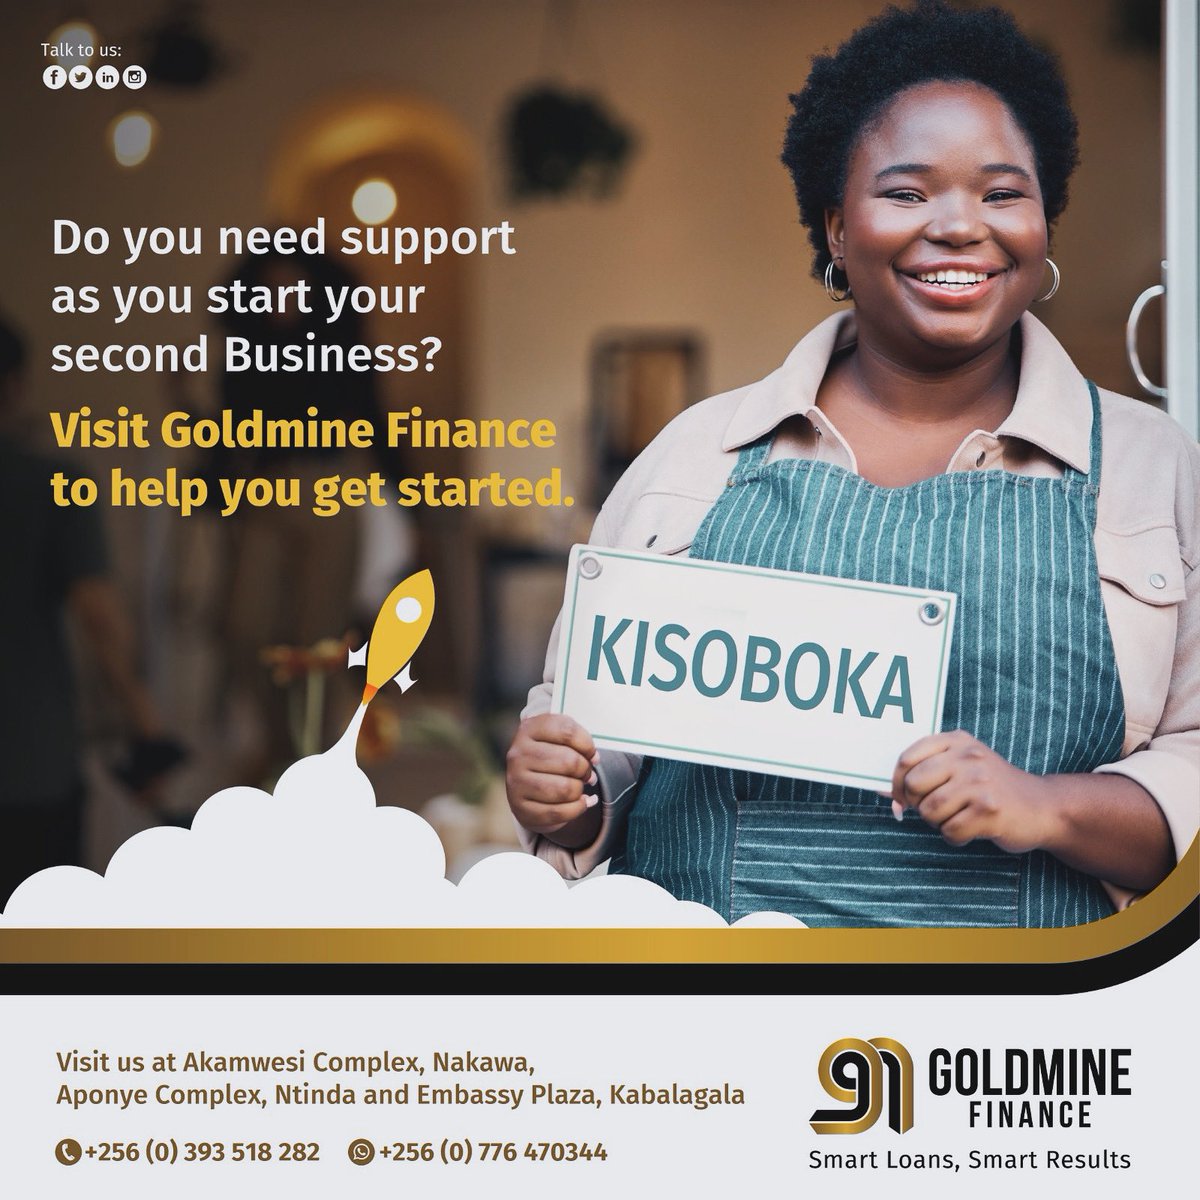 Call us today on 0393518282 or visit any of our branches or WhatsApp us on 0776470344 #BusinessLoan #GoldmineFinance #SmartGoalsSmartResults